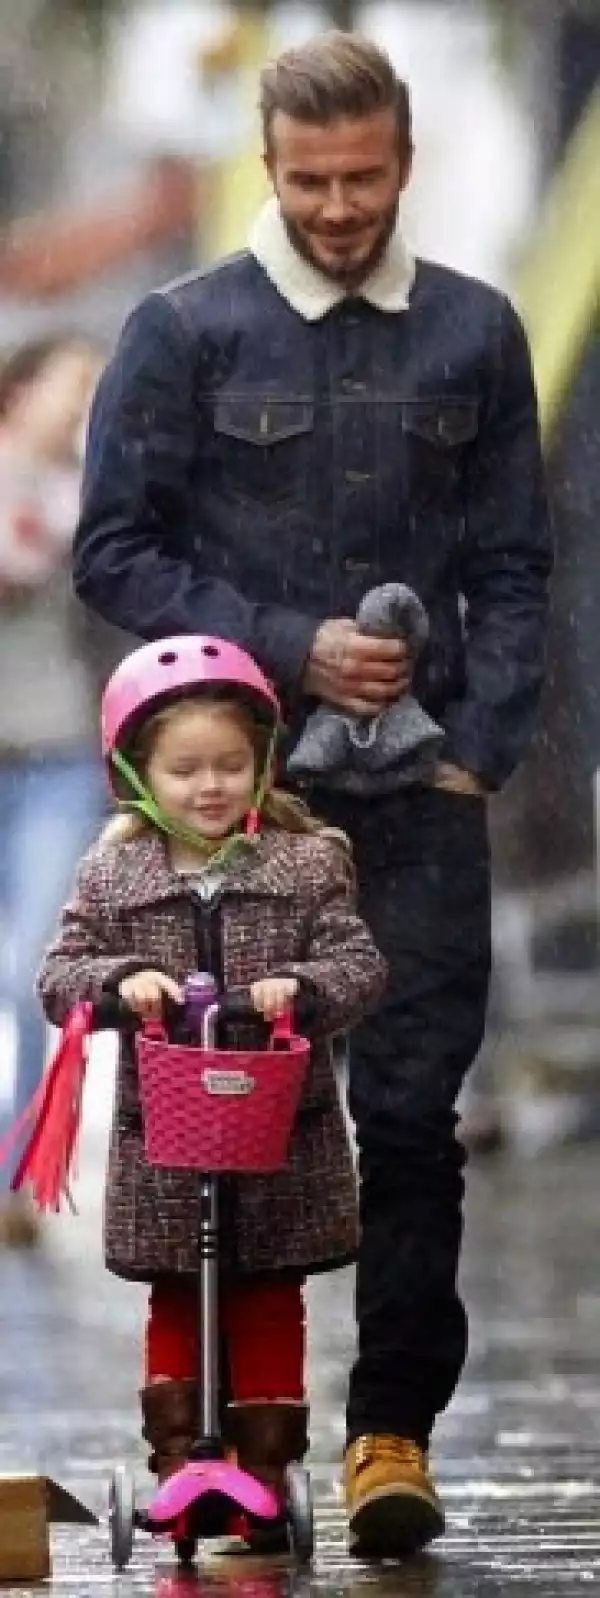 David Beckham looks on proudly as his daughter scoots through London